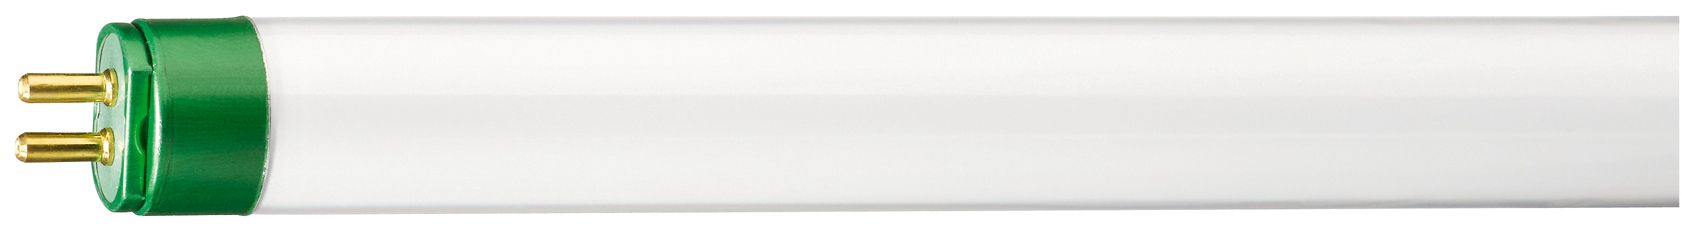 220509 (F54T5/835/HO/EA/ALTO 49W) Linear Fluorescent Lamp Philips Lighting;Signify Lamps